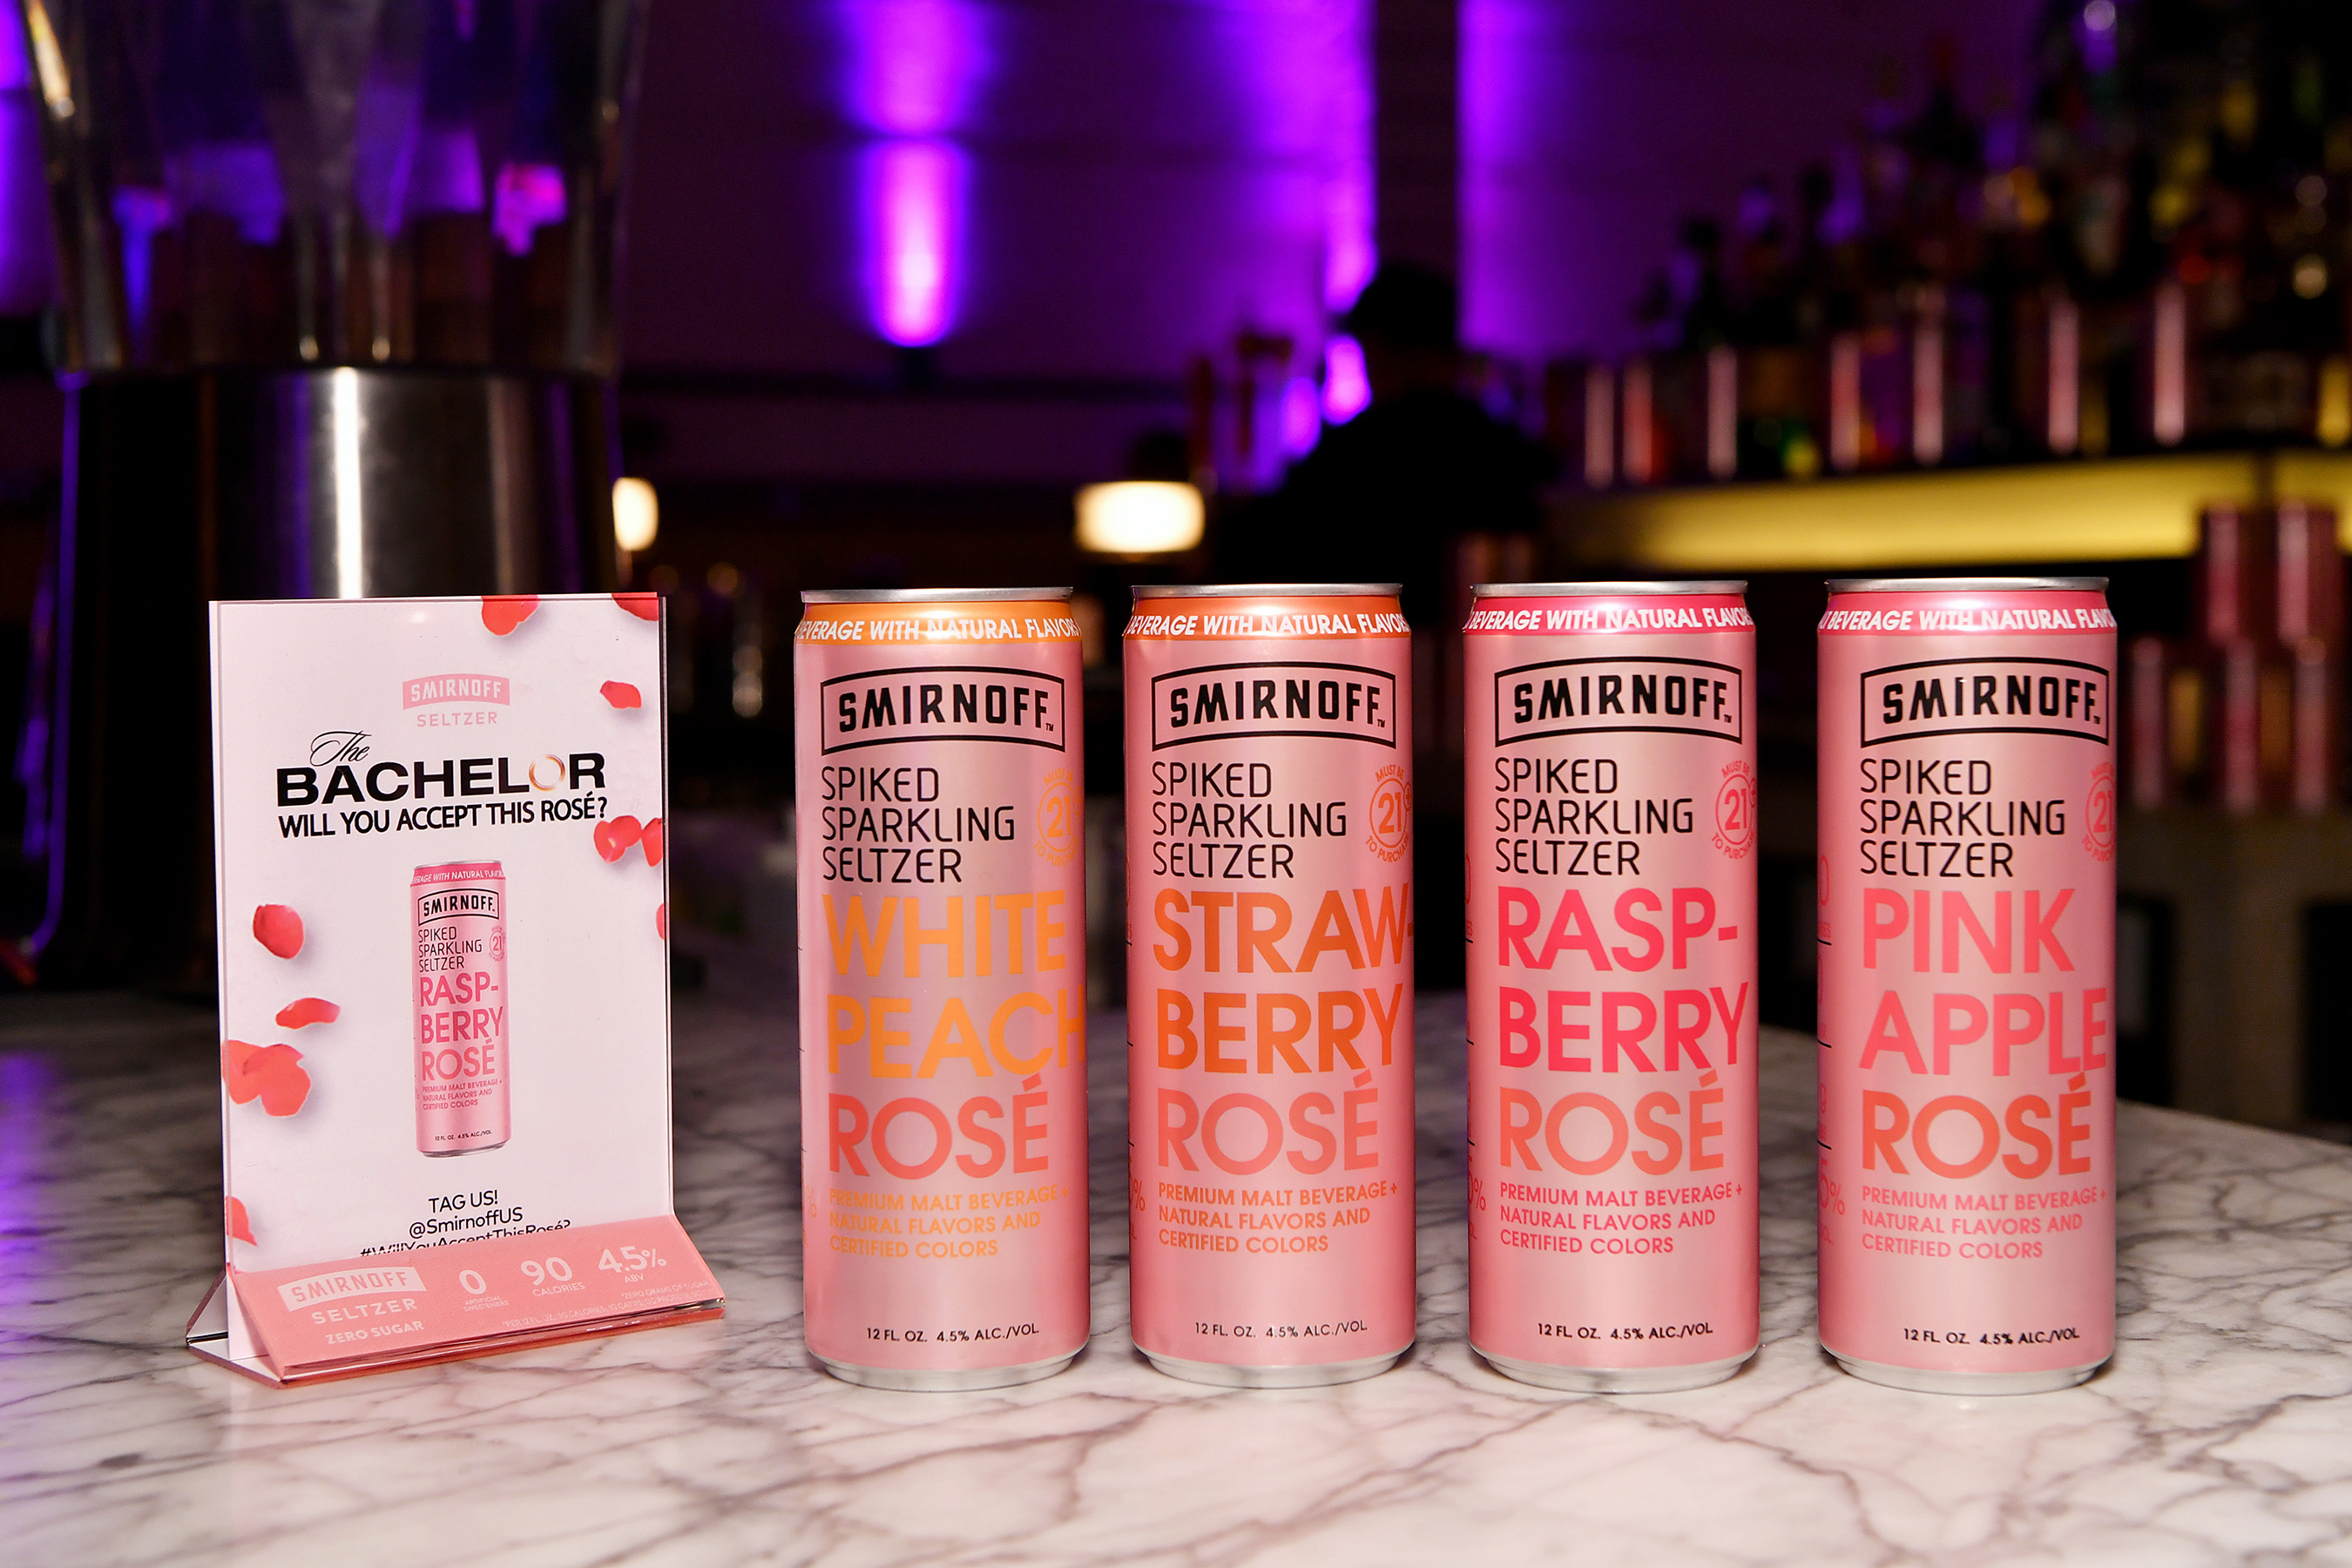 Smirnoff Seltzer launches new 'Will You Accept This Rosé?' Campaign on January 13, 2020 in Brooklyn, New York.